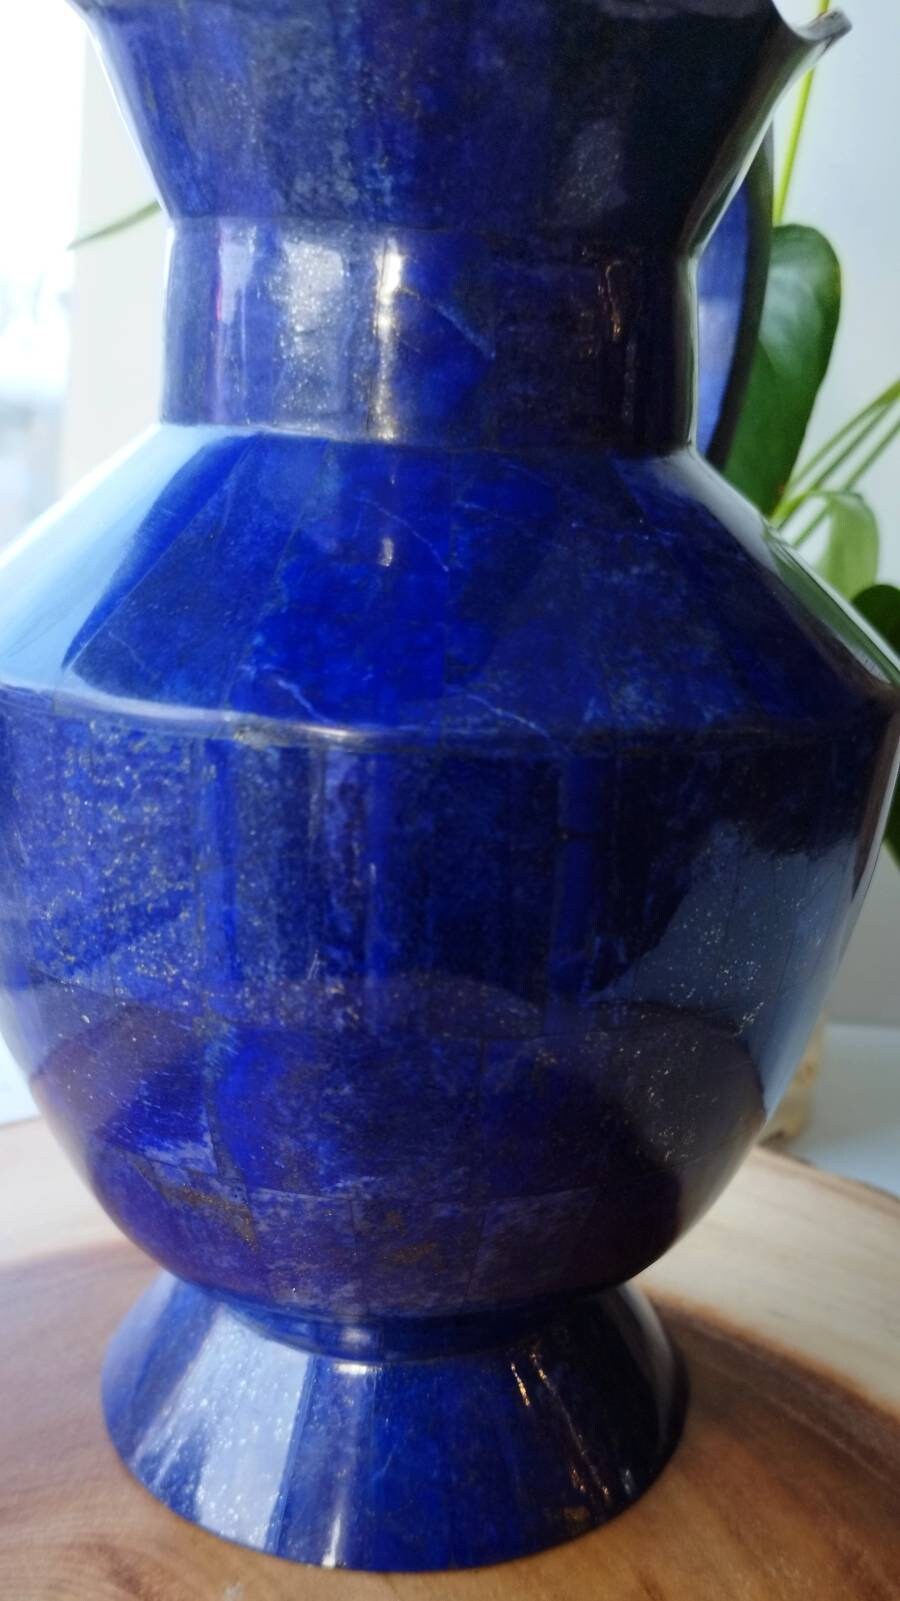 Stunning Lapis Lazuli, Tea pot, Water Pot made in Afghanistan, decor, home decor, gift for her, gift for Mom, gift for him